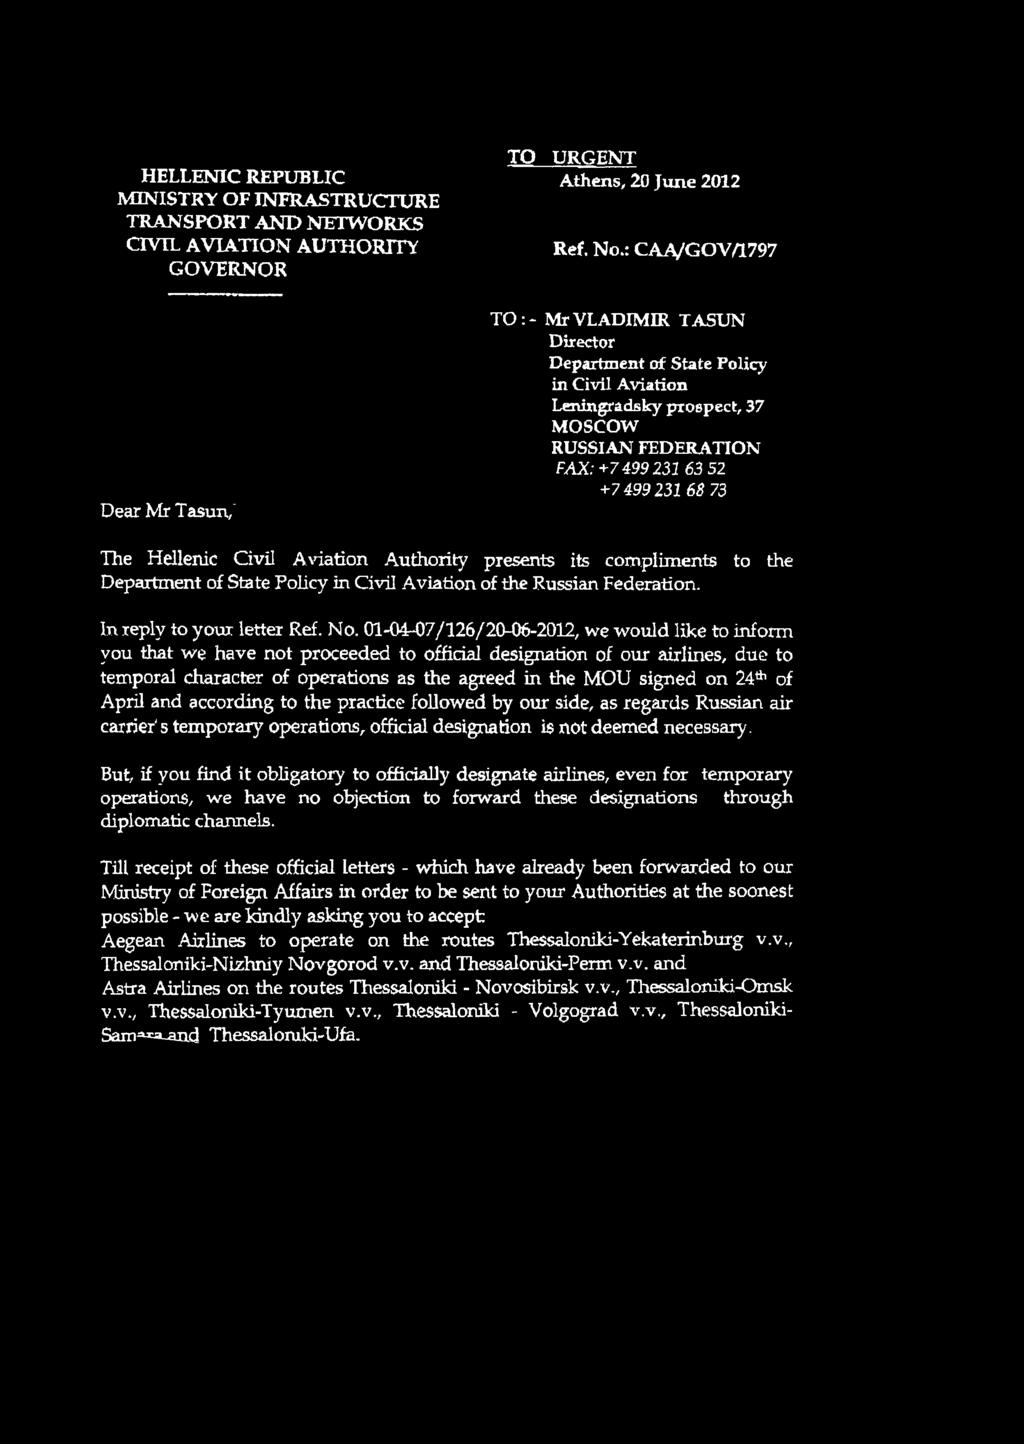 HELLENIC REPUBLIC MINISTRY OF INFRASTRUCTURE TRANSPORT AND NETWORKS CIVIL AVIATION AUTHORITY GOVERNOR Dear Mr Tasun/ TO TO:- URGENT Athens, 20 June 2012 Ref. No.